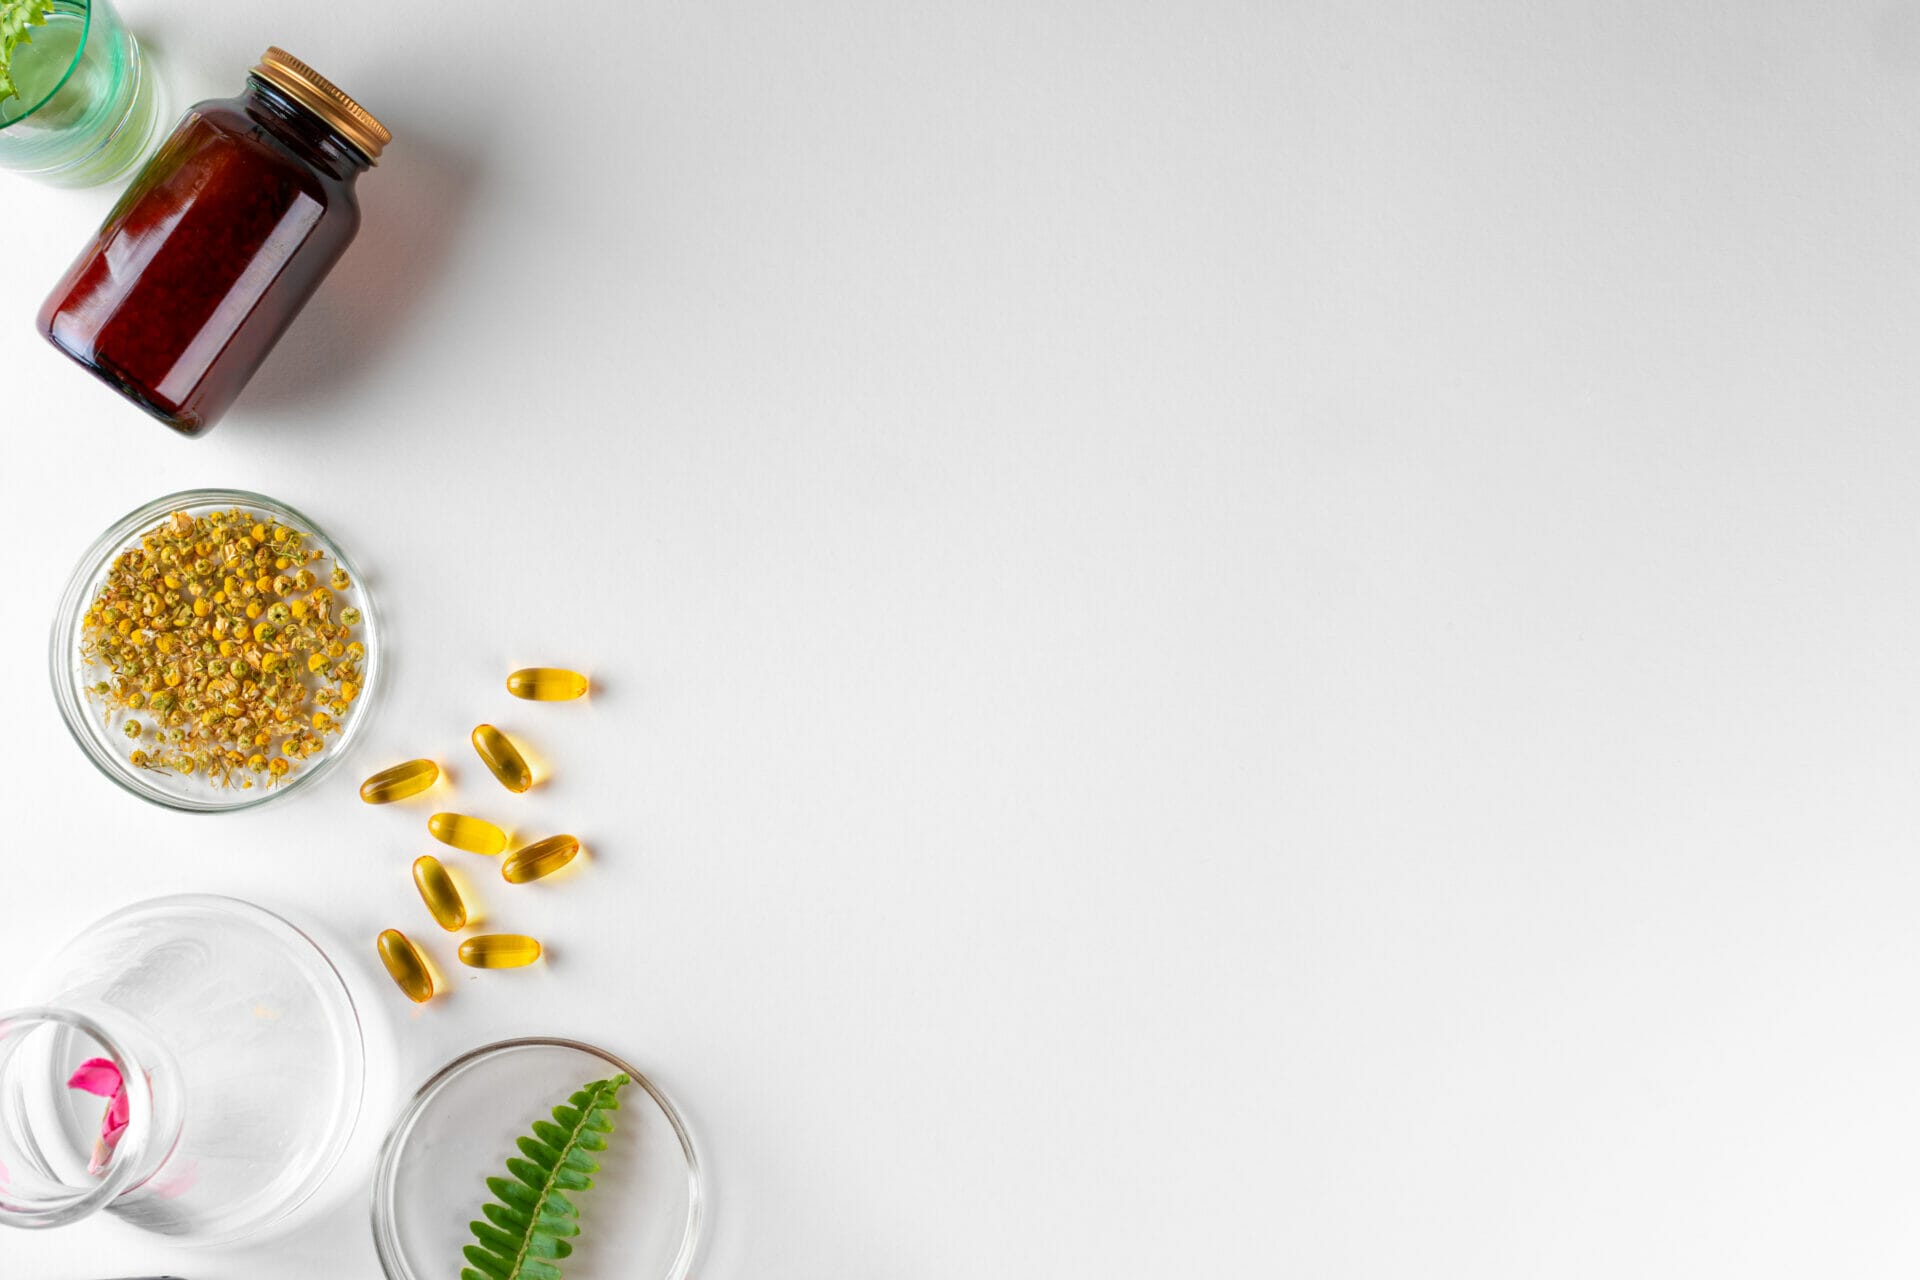 Contract manufacturing outlook for dietary supplements in 2022